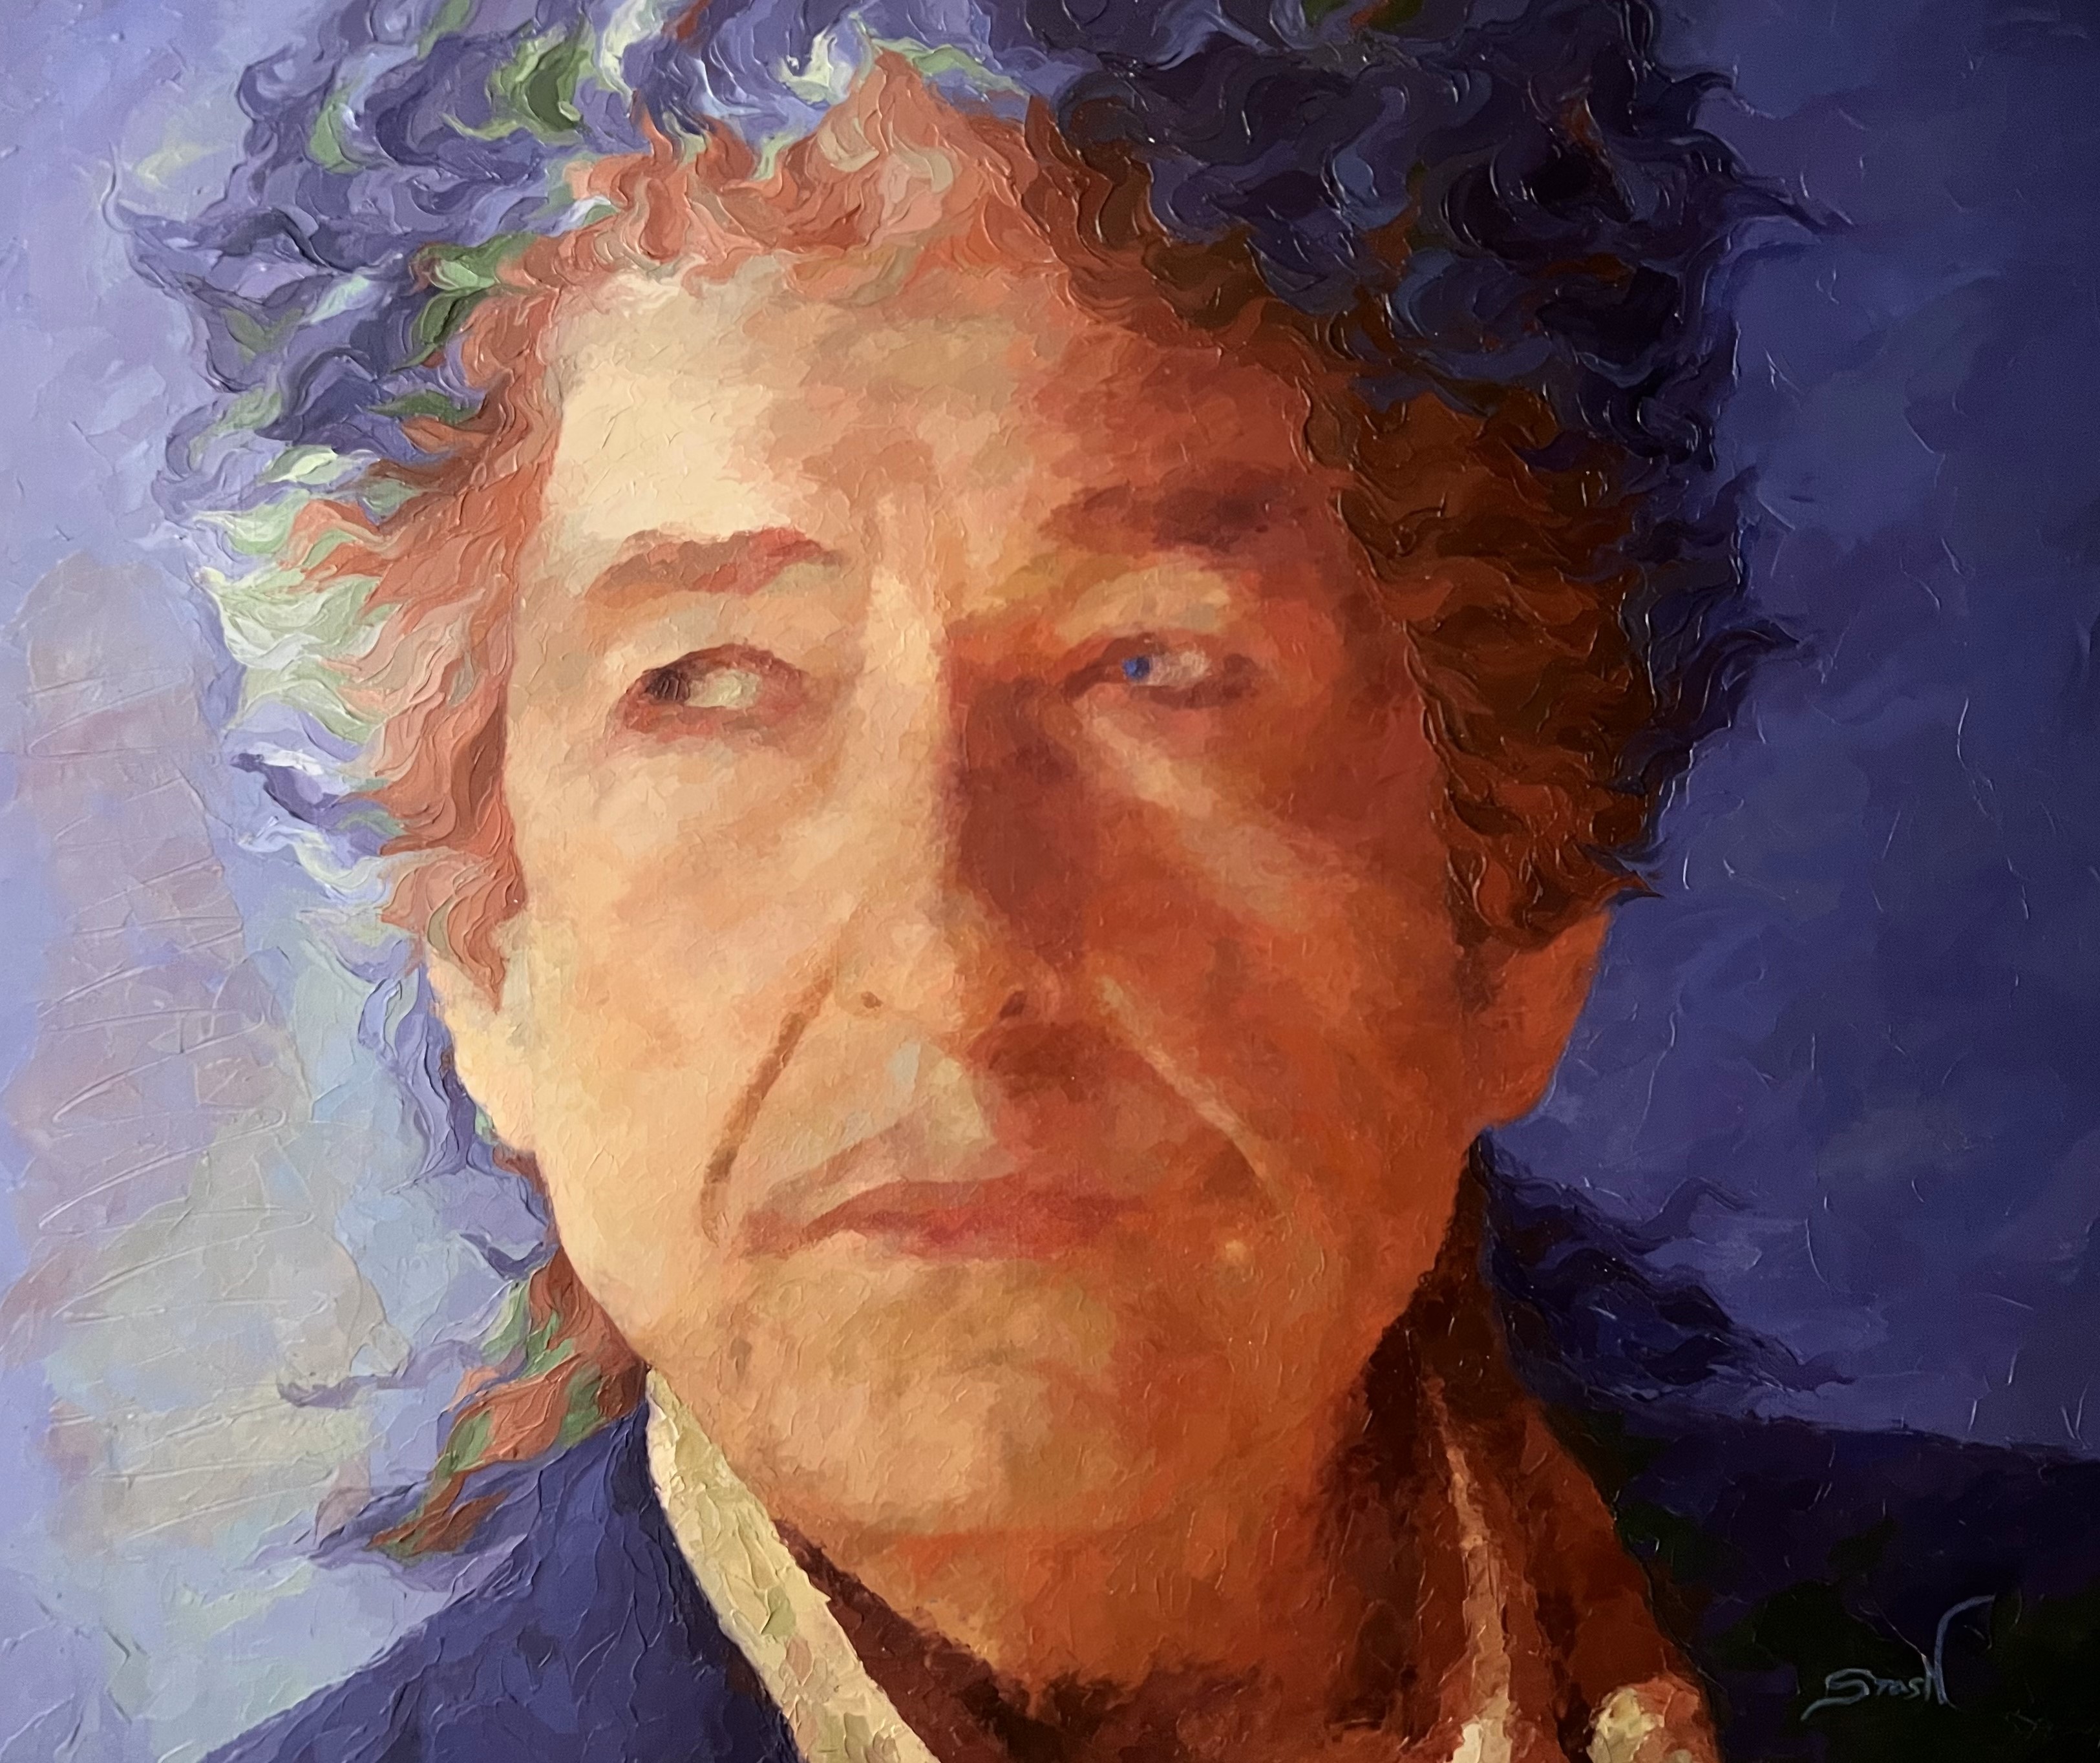 STAS NAMIN - Bob Dylan - Oil on Canvas - 25x30 inches